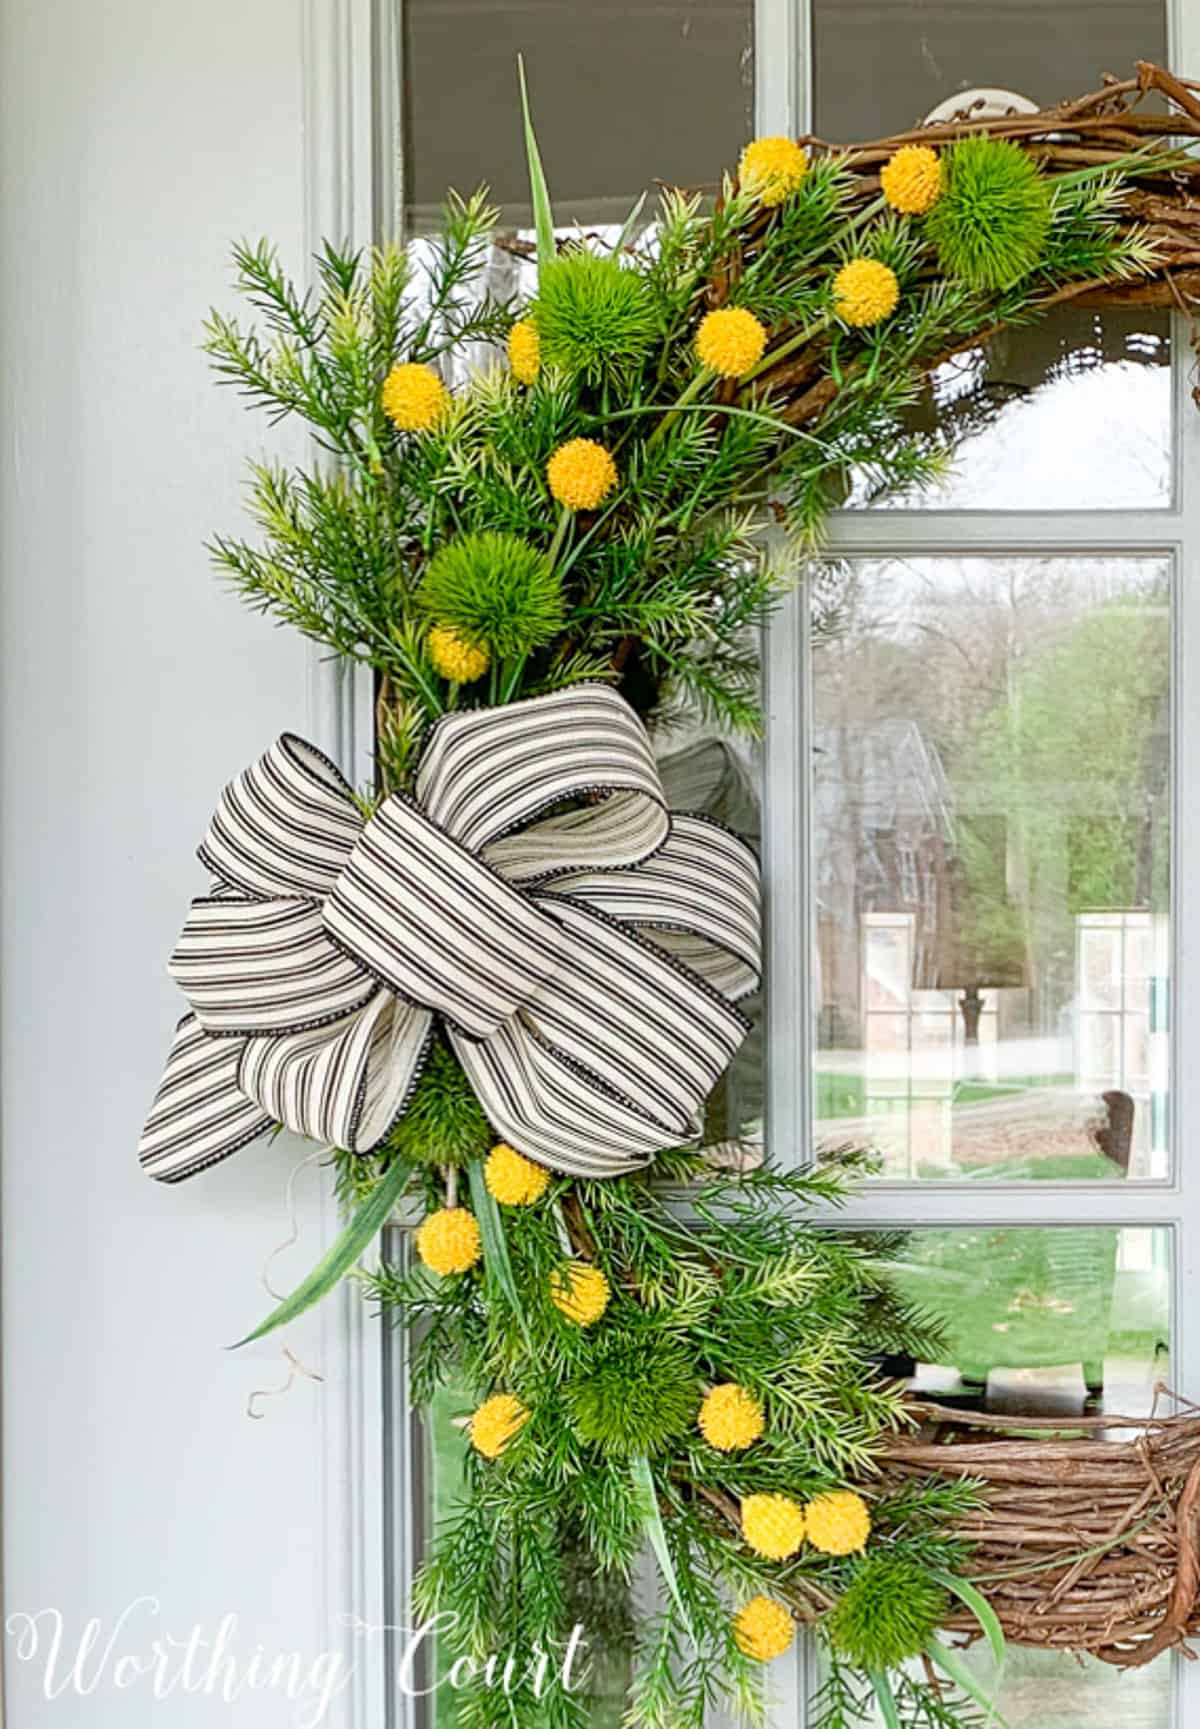 grapevine wreath decorated with yellow flowers, greenery stems, and burlap and black and white ribbon for spring